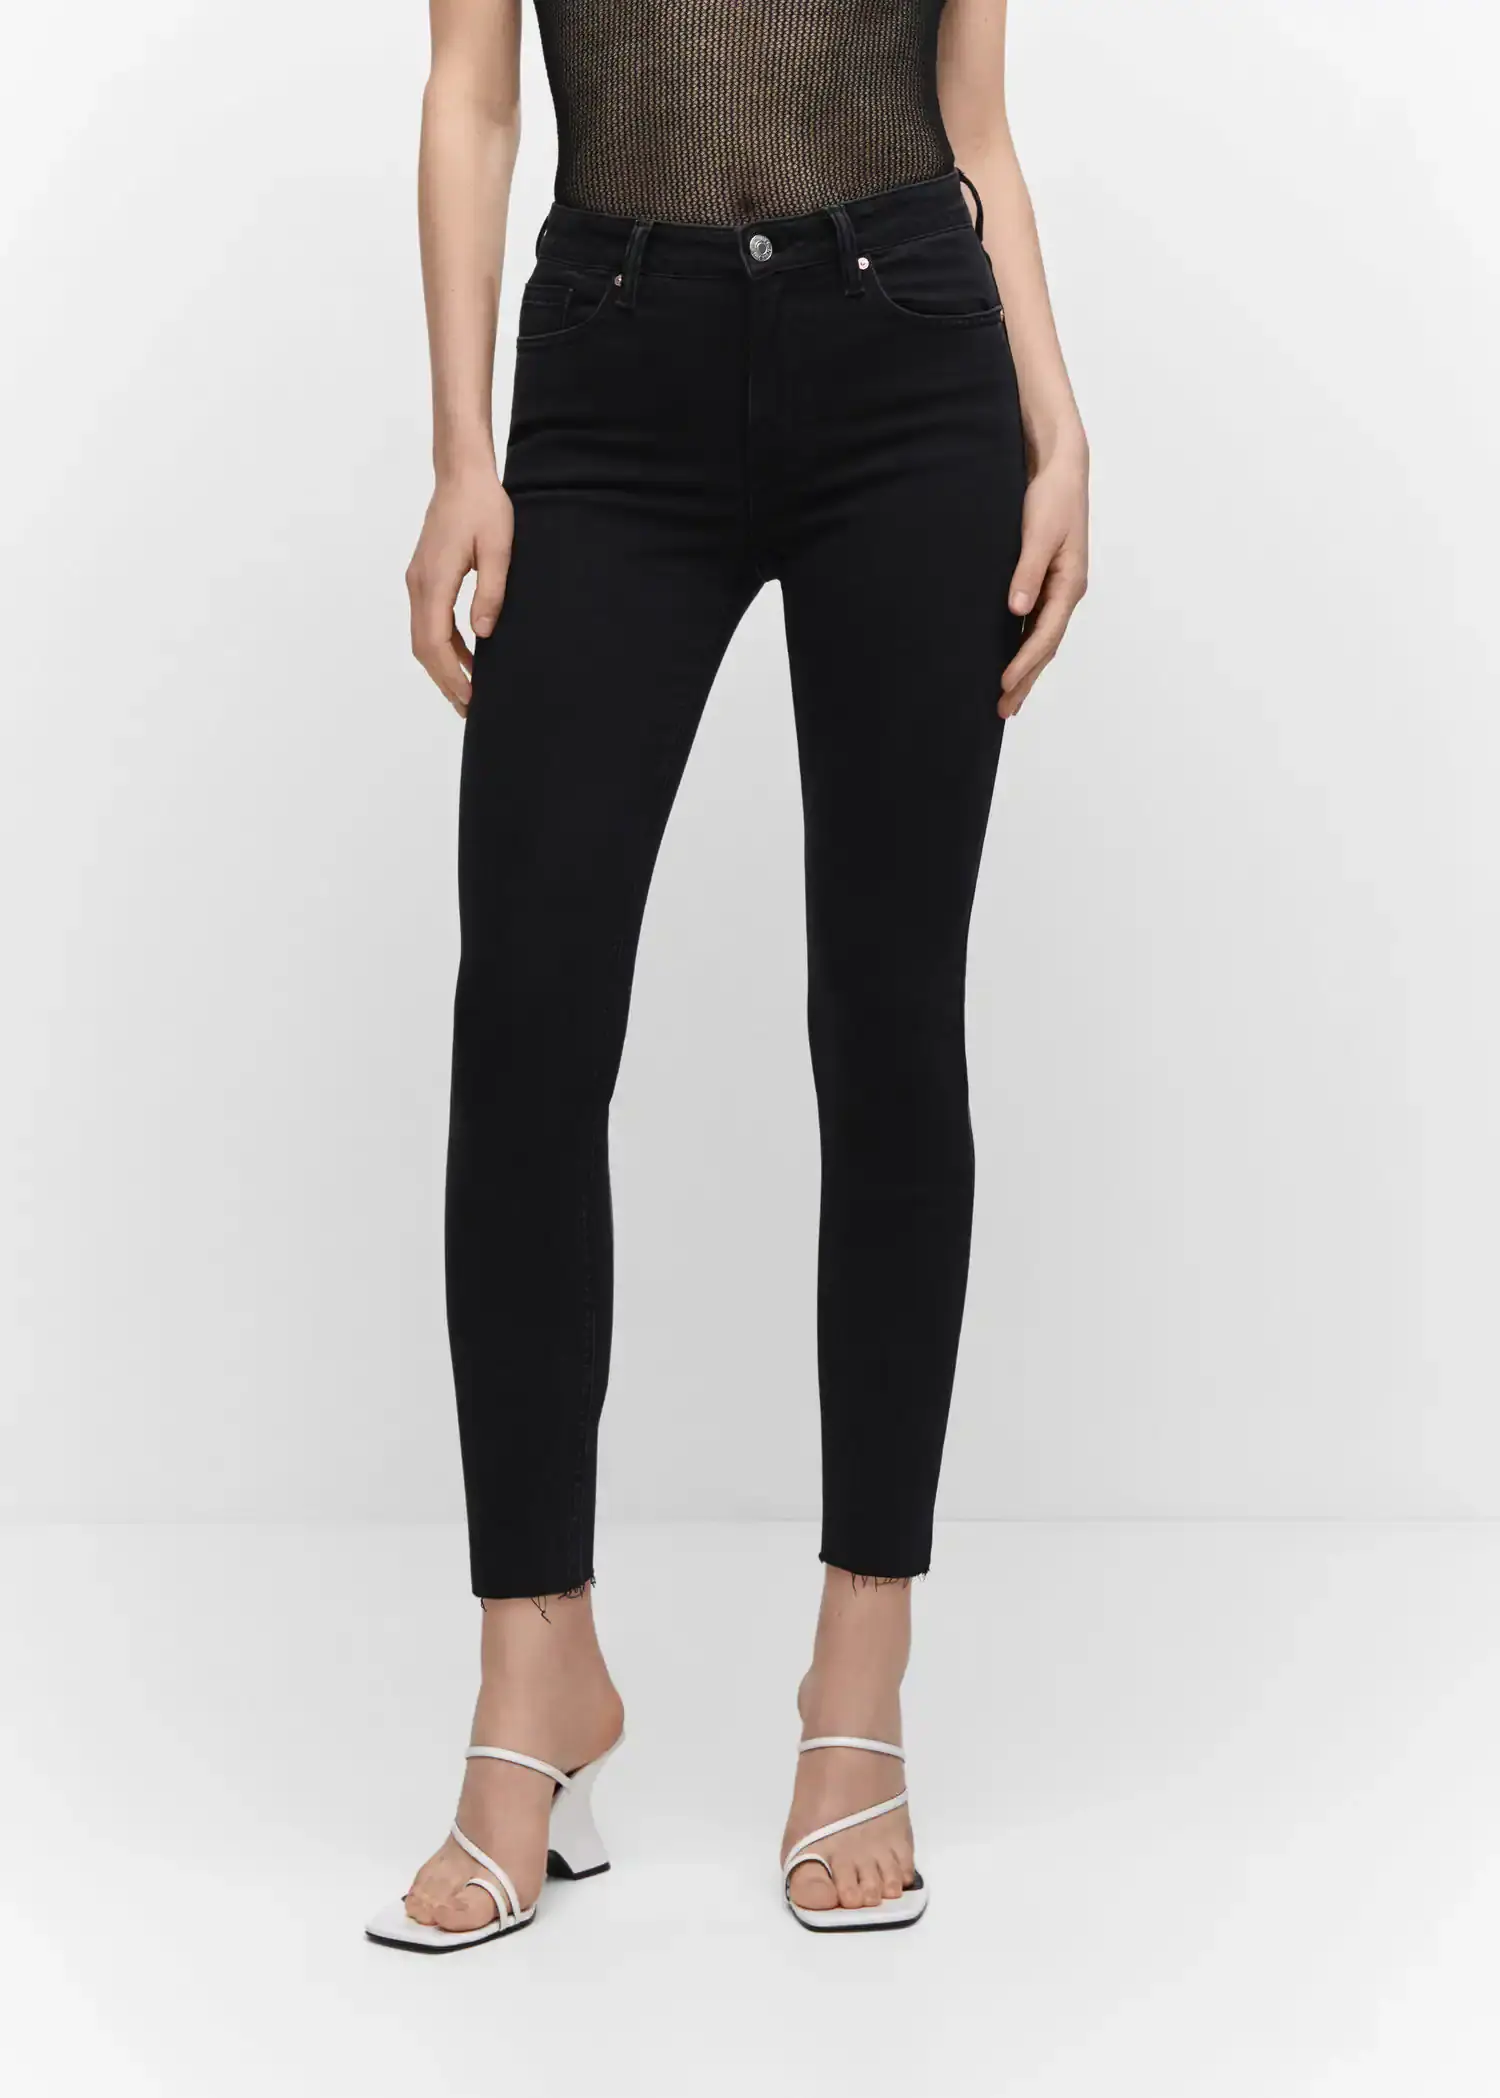 Mango Skinny cropped jeans. a pair of black pants are on a woman. 